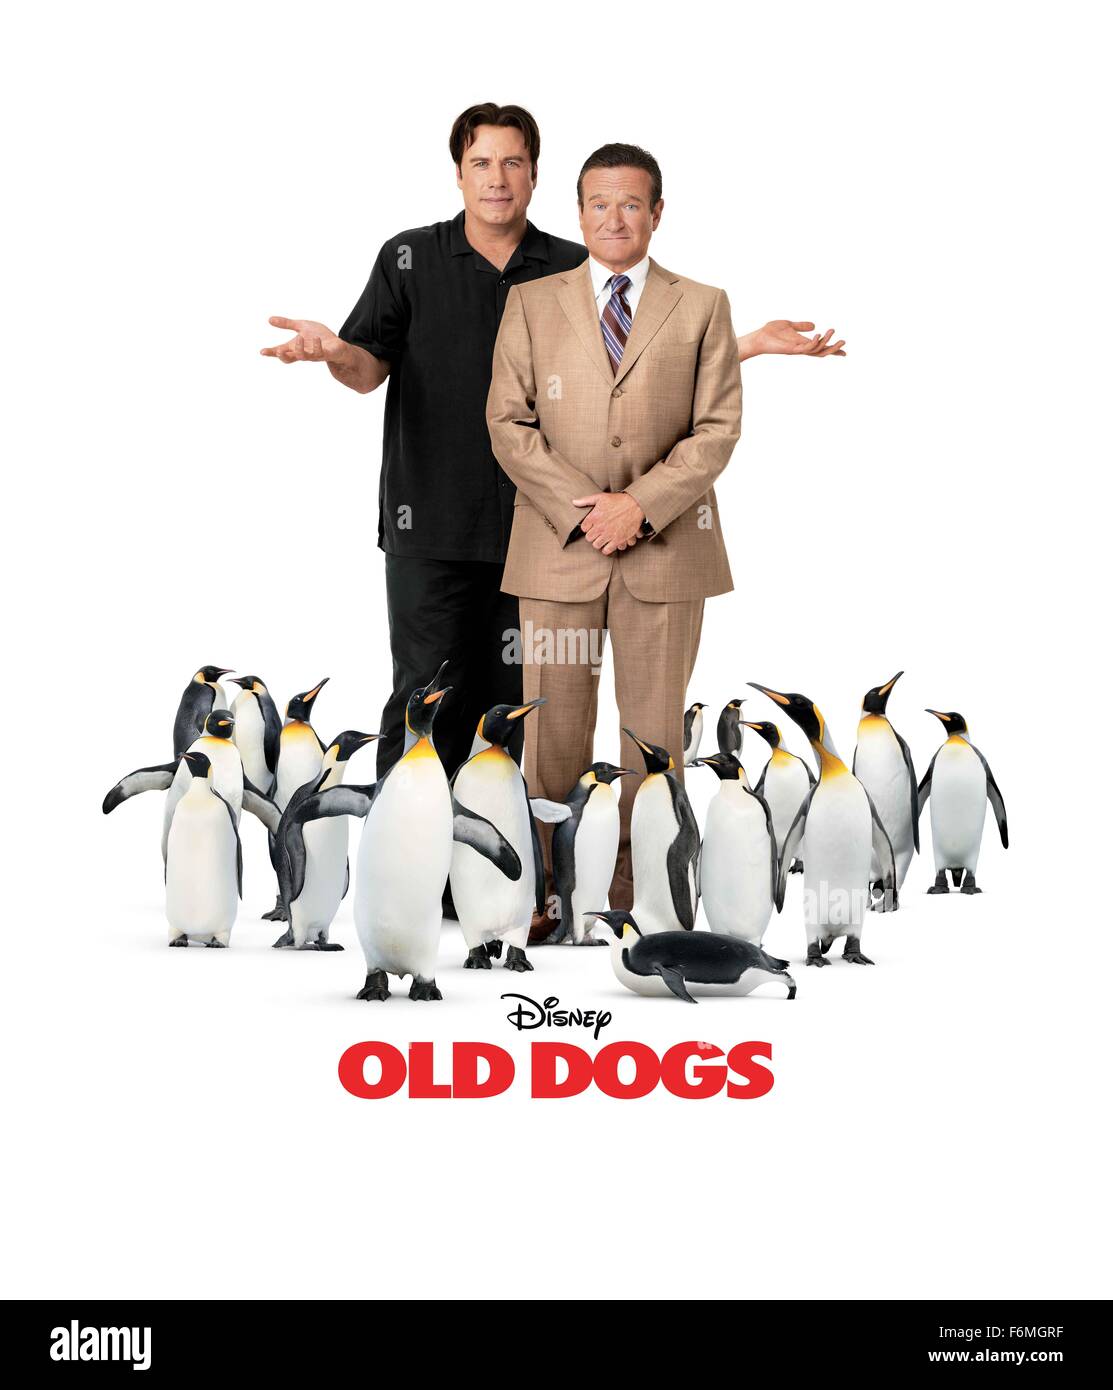 RELEASE DATE: November 25, 2009. MOVIE TITLE: Old Dogs. STUDIO: Walt Disney Pictures. PLOT: Charlie and Dan have been best friends and business partners for thirty years; their Manhattan public relations firm is on the verge of a huge business deal with a Japanese company. With two weeks to sew up the contract, Dan gets a surprise: a woman he married on a drunken impulse nearly nine years before (annulled the next day) shows up to tell him he's the father of her twins, now seven, and she'll be in jail for 14 days for a political protest. Dan volunteers to keep the tykes, although he's up tight Stock Photo